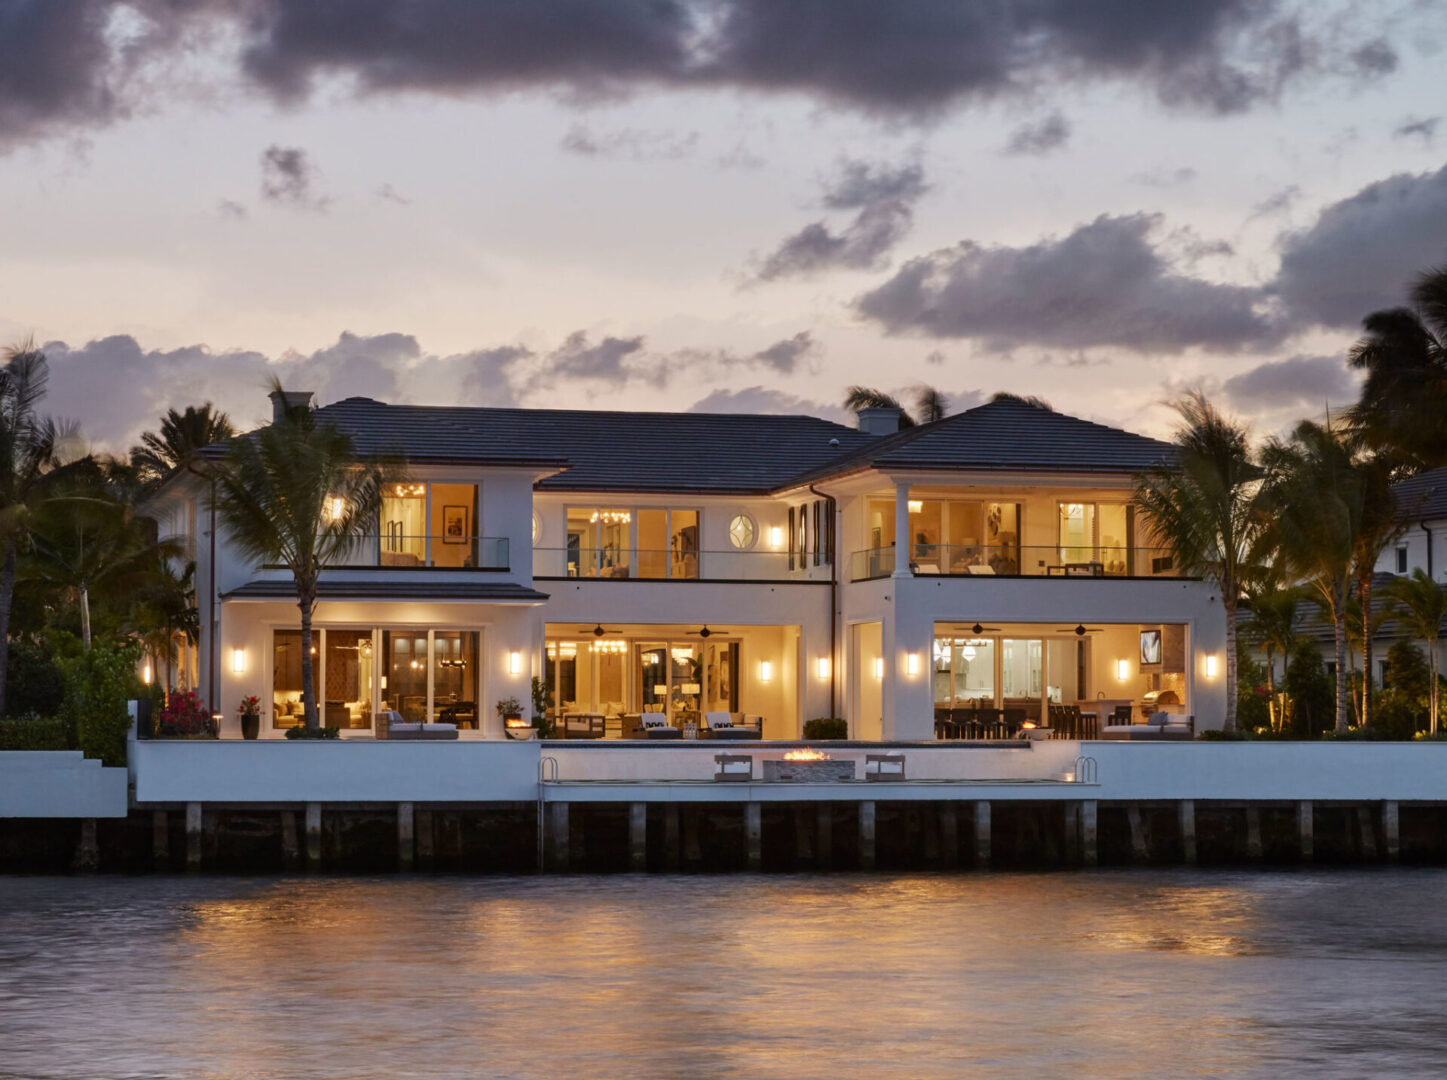 A large house on the water at dusk.